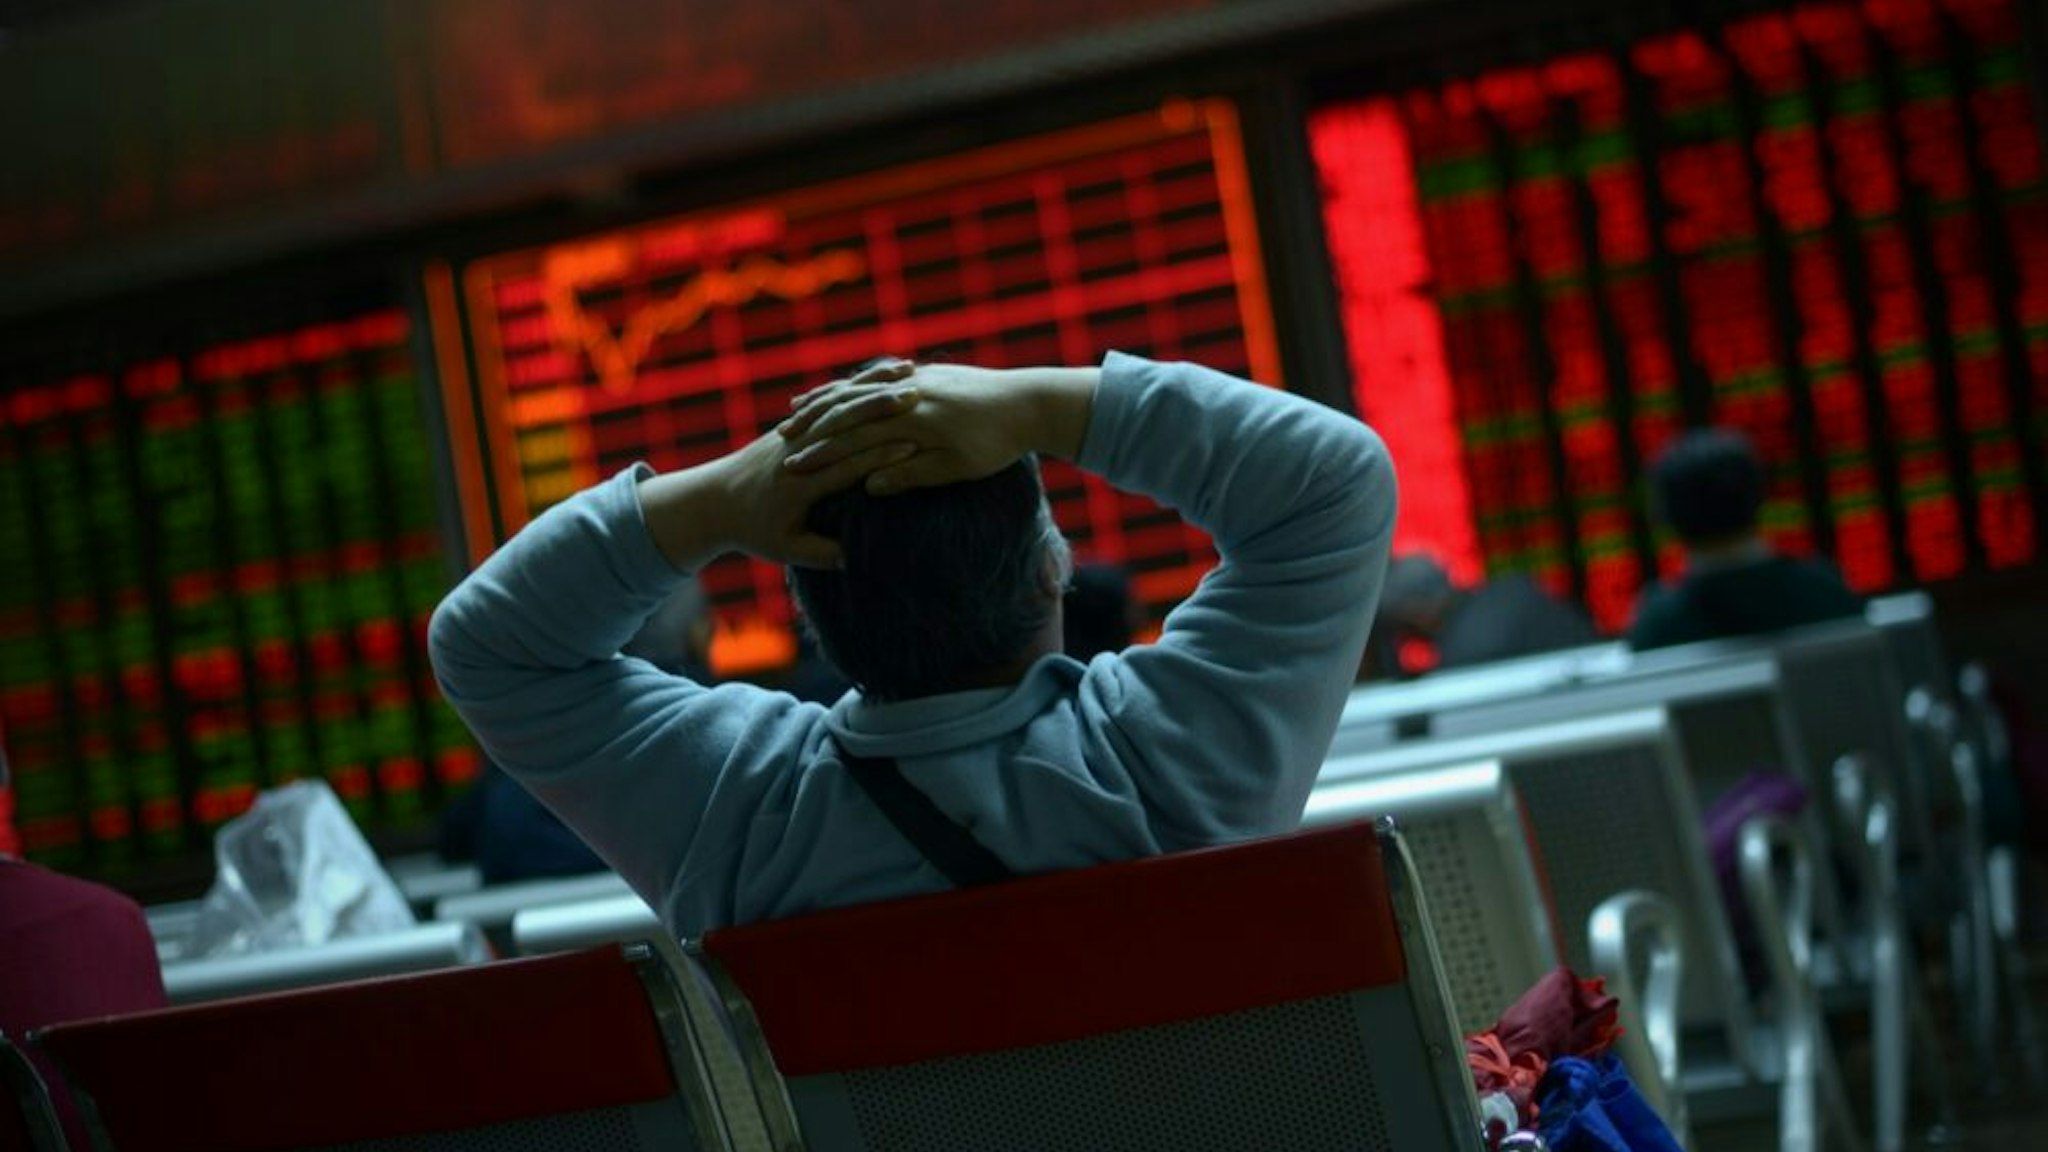 TOPSHOT - An investor looks at screens showing stock market movements at a securities company in Beijing on January 8, 2016. Chinese equities led another day of volatility across Asia on January 8 as investors were panicked by Beijing's attempts to stabilise its beleaguered markets, with fears growing the global economy could be teetering.